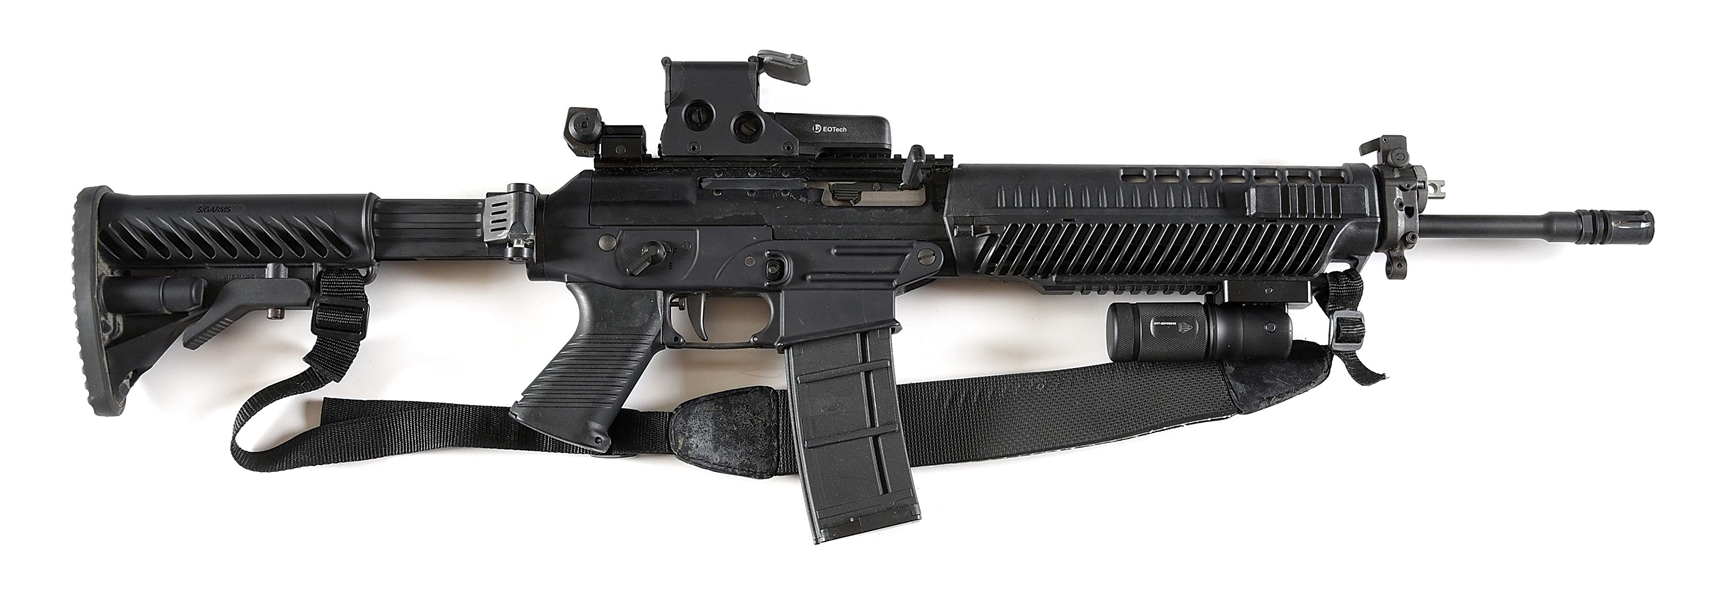 (M) SIG SAUER SIG 556 SEMI-AUTOMATIC RIFLE FITTED WITH AN EOTECH HOLOGRAPHIC SIGHT.